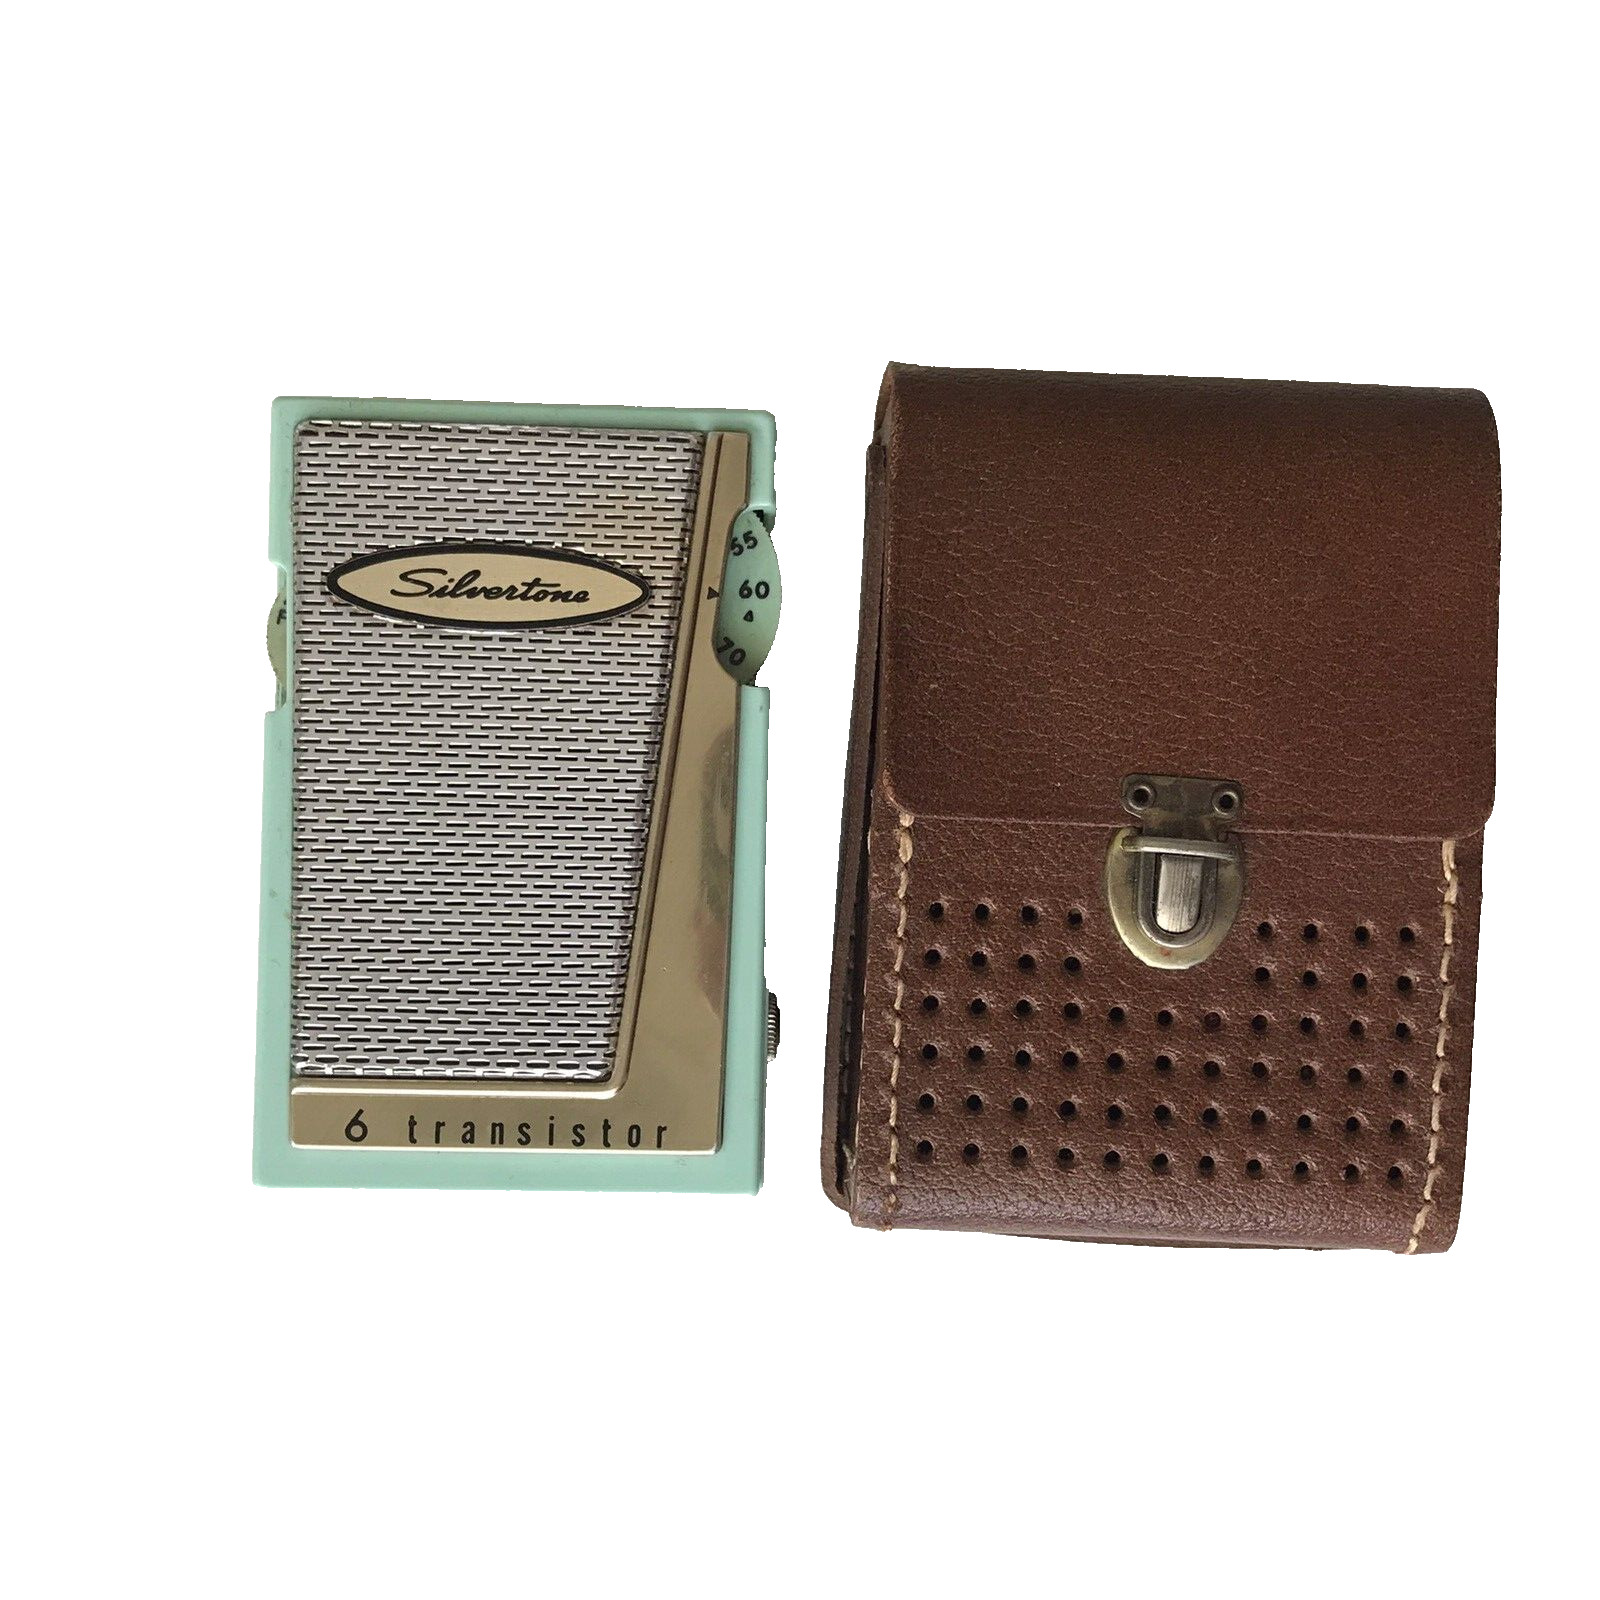 Vtg Silvertone 6 Transistor Radio #1203 Mint Green with Leather Case Works Read